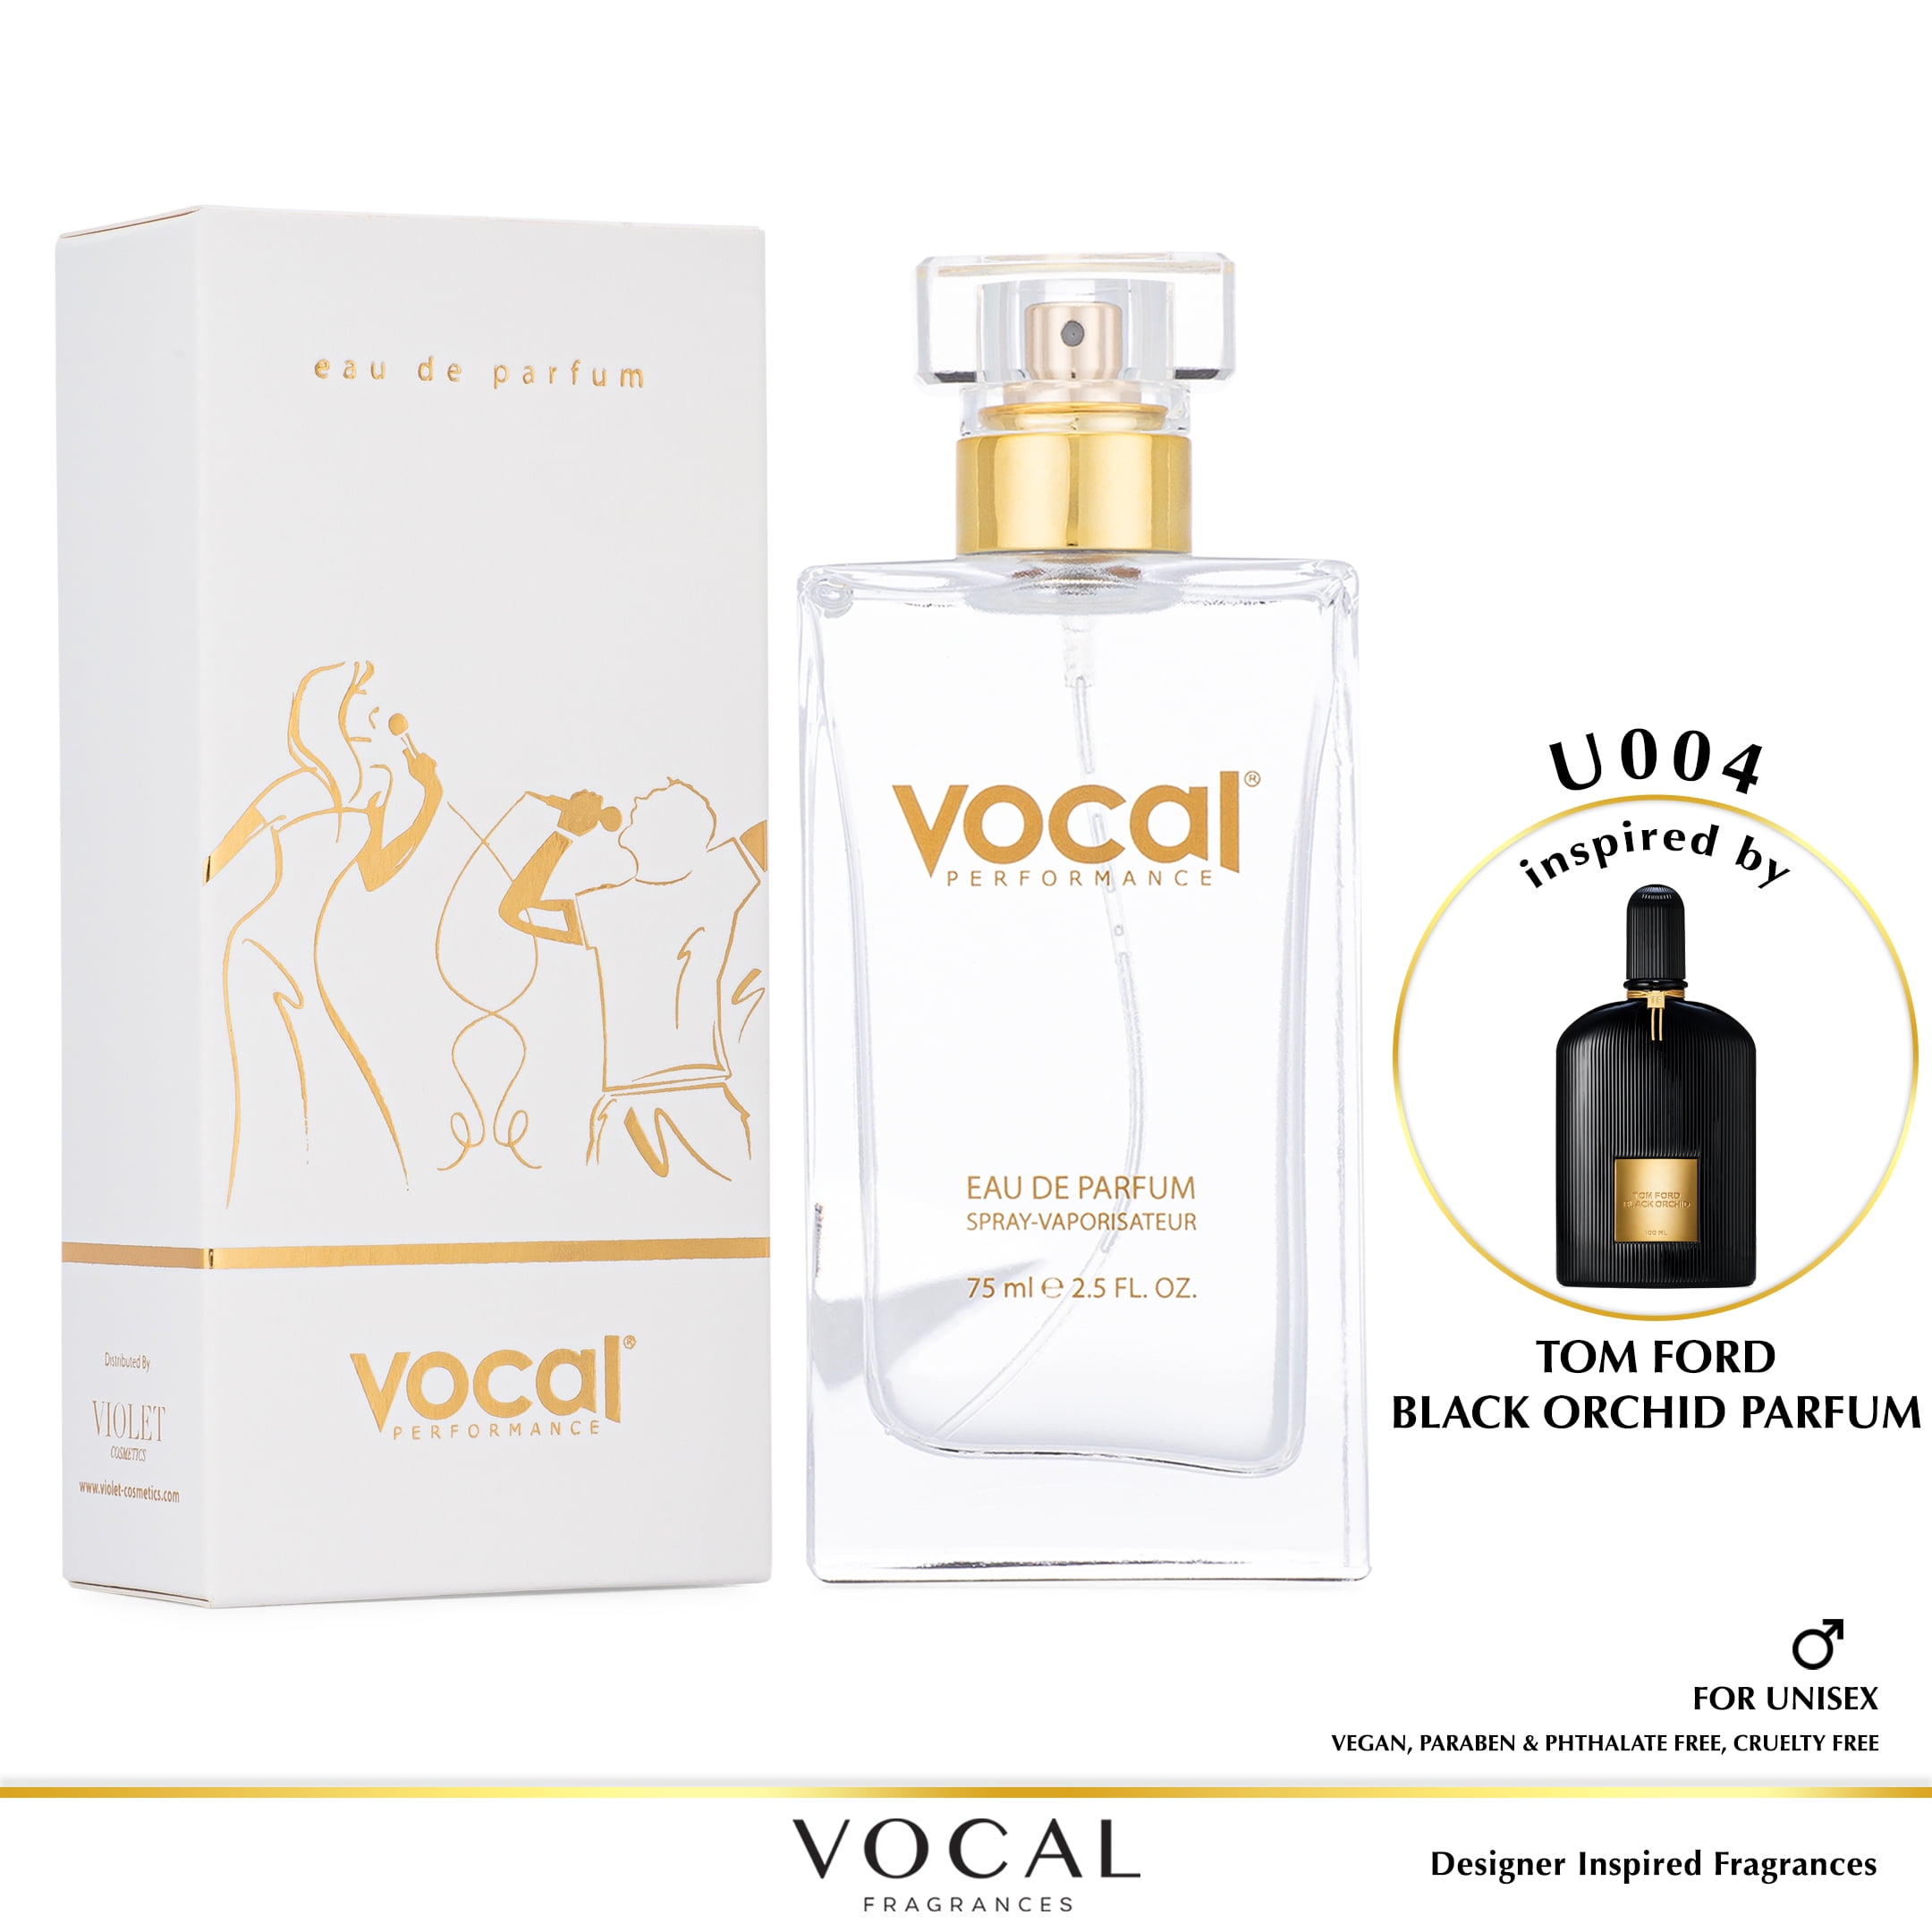 Vocal Fragrance Inspired by Tom Ford Black Orchid Eau de Parfum For Unisex   FL. OZ. 75 ml. Vegan, Paraben & Phthalate Free Never Tested on Animals  